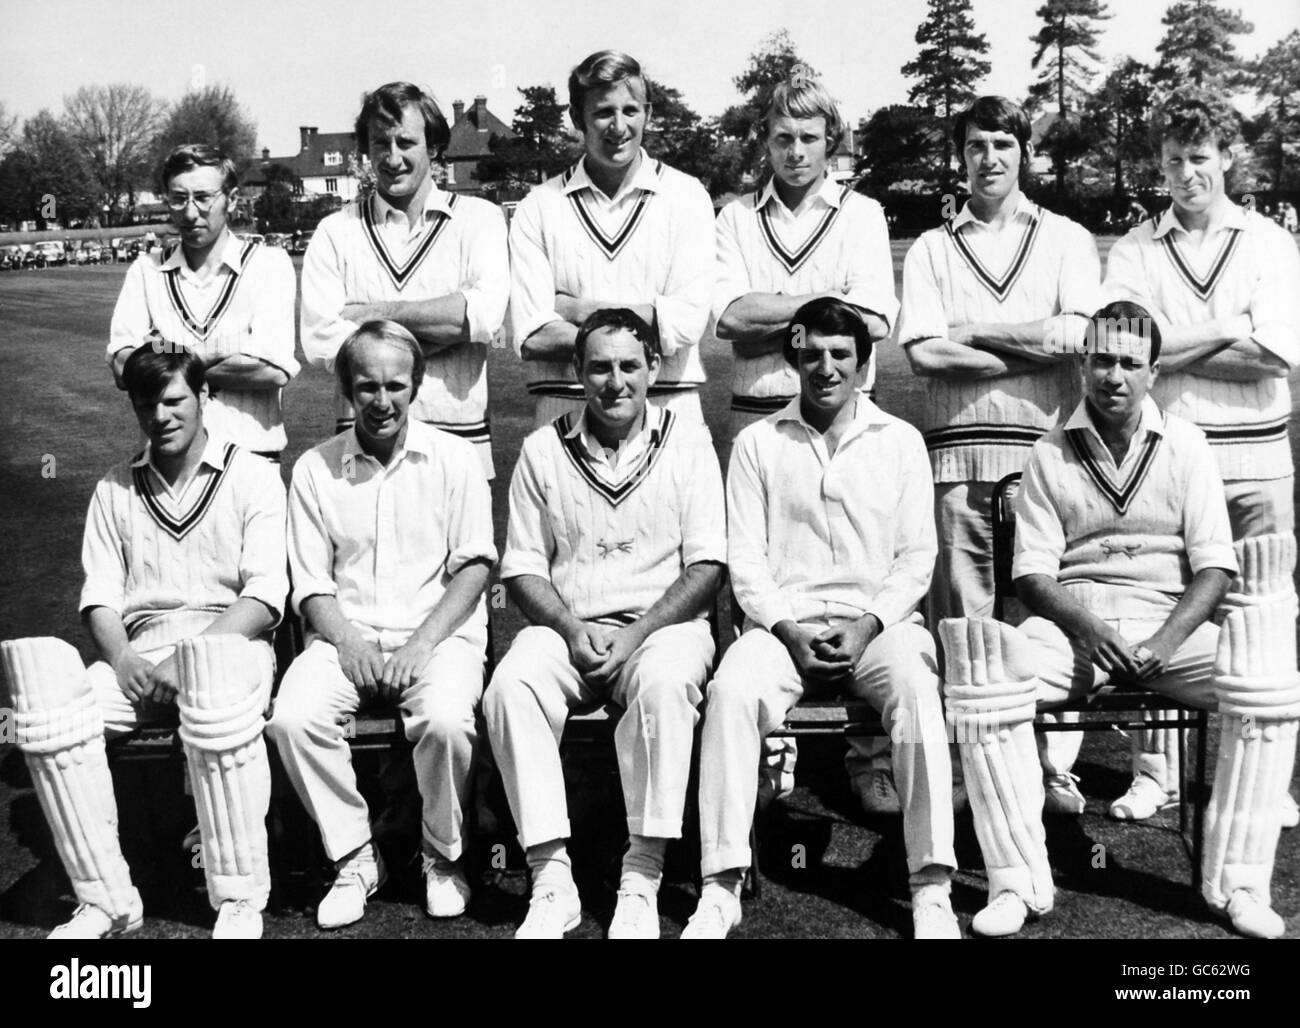 Cricket - Leicestershire County Cricket Club - équipe.Équipe de cricket de Leicestershire Mai 1971 Banque D'Images